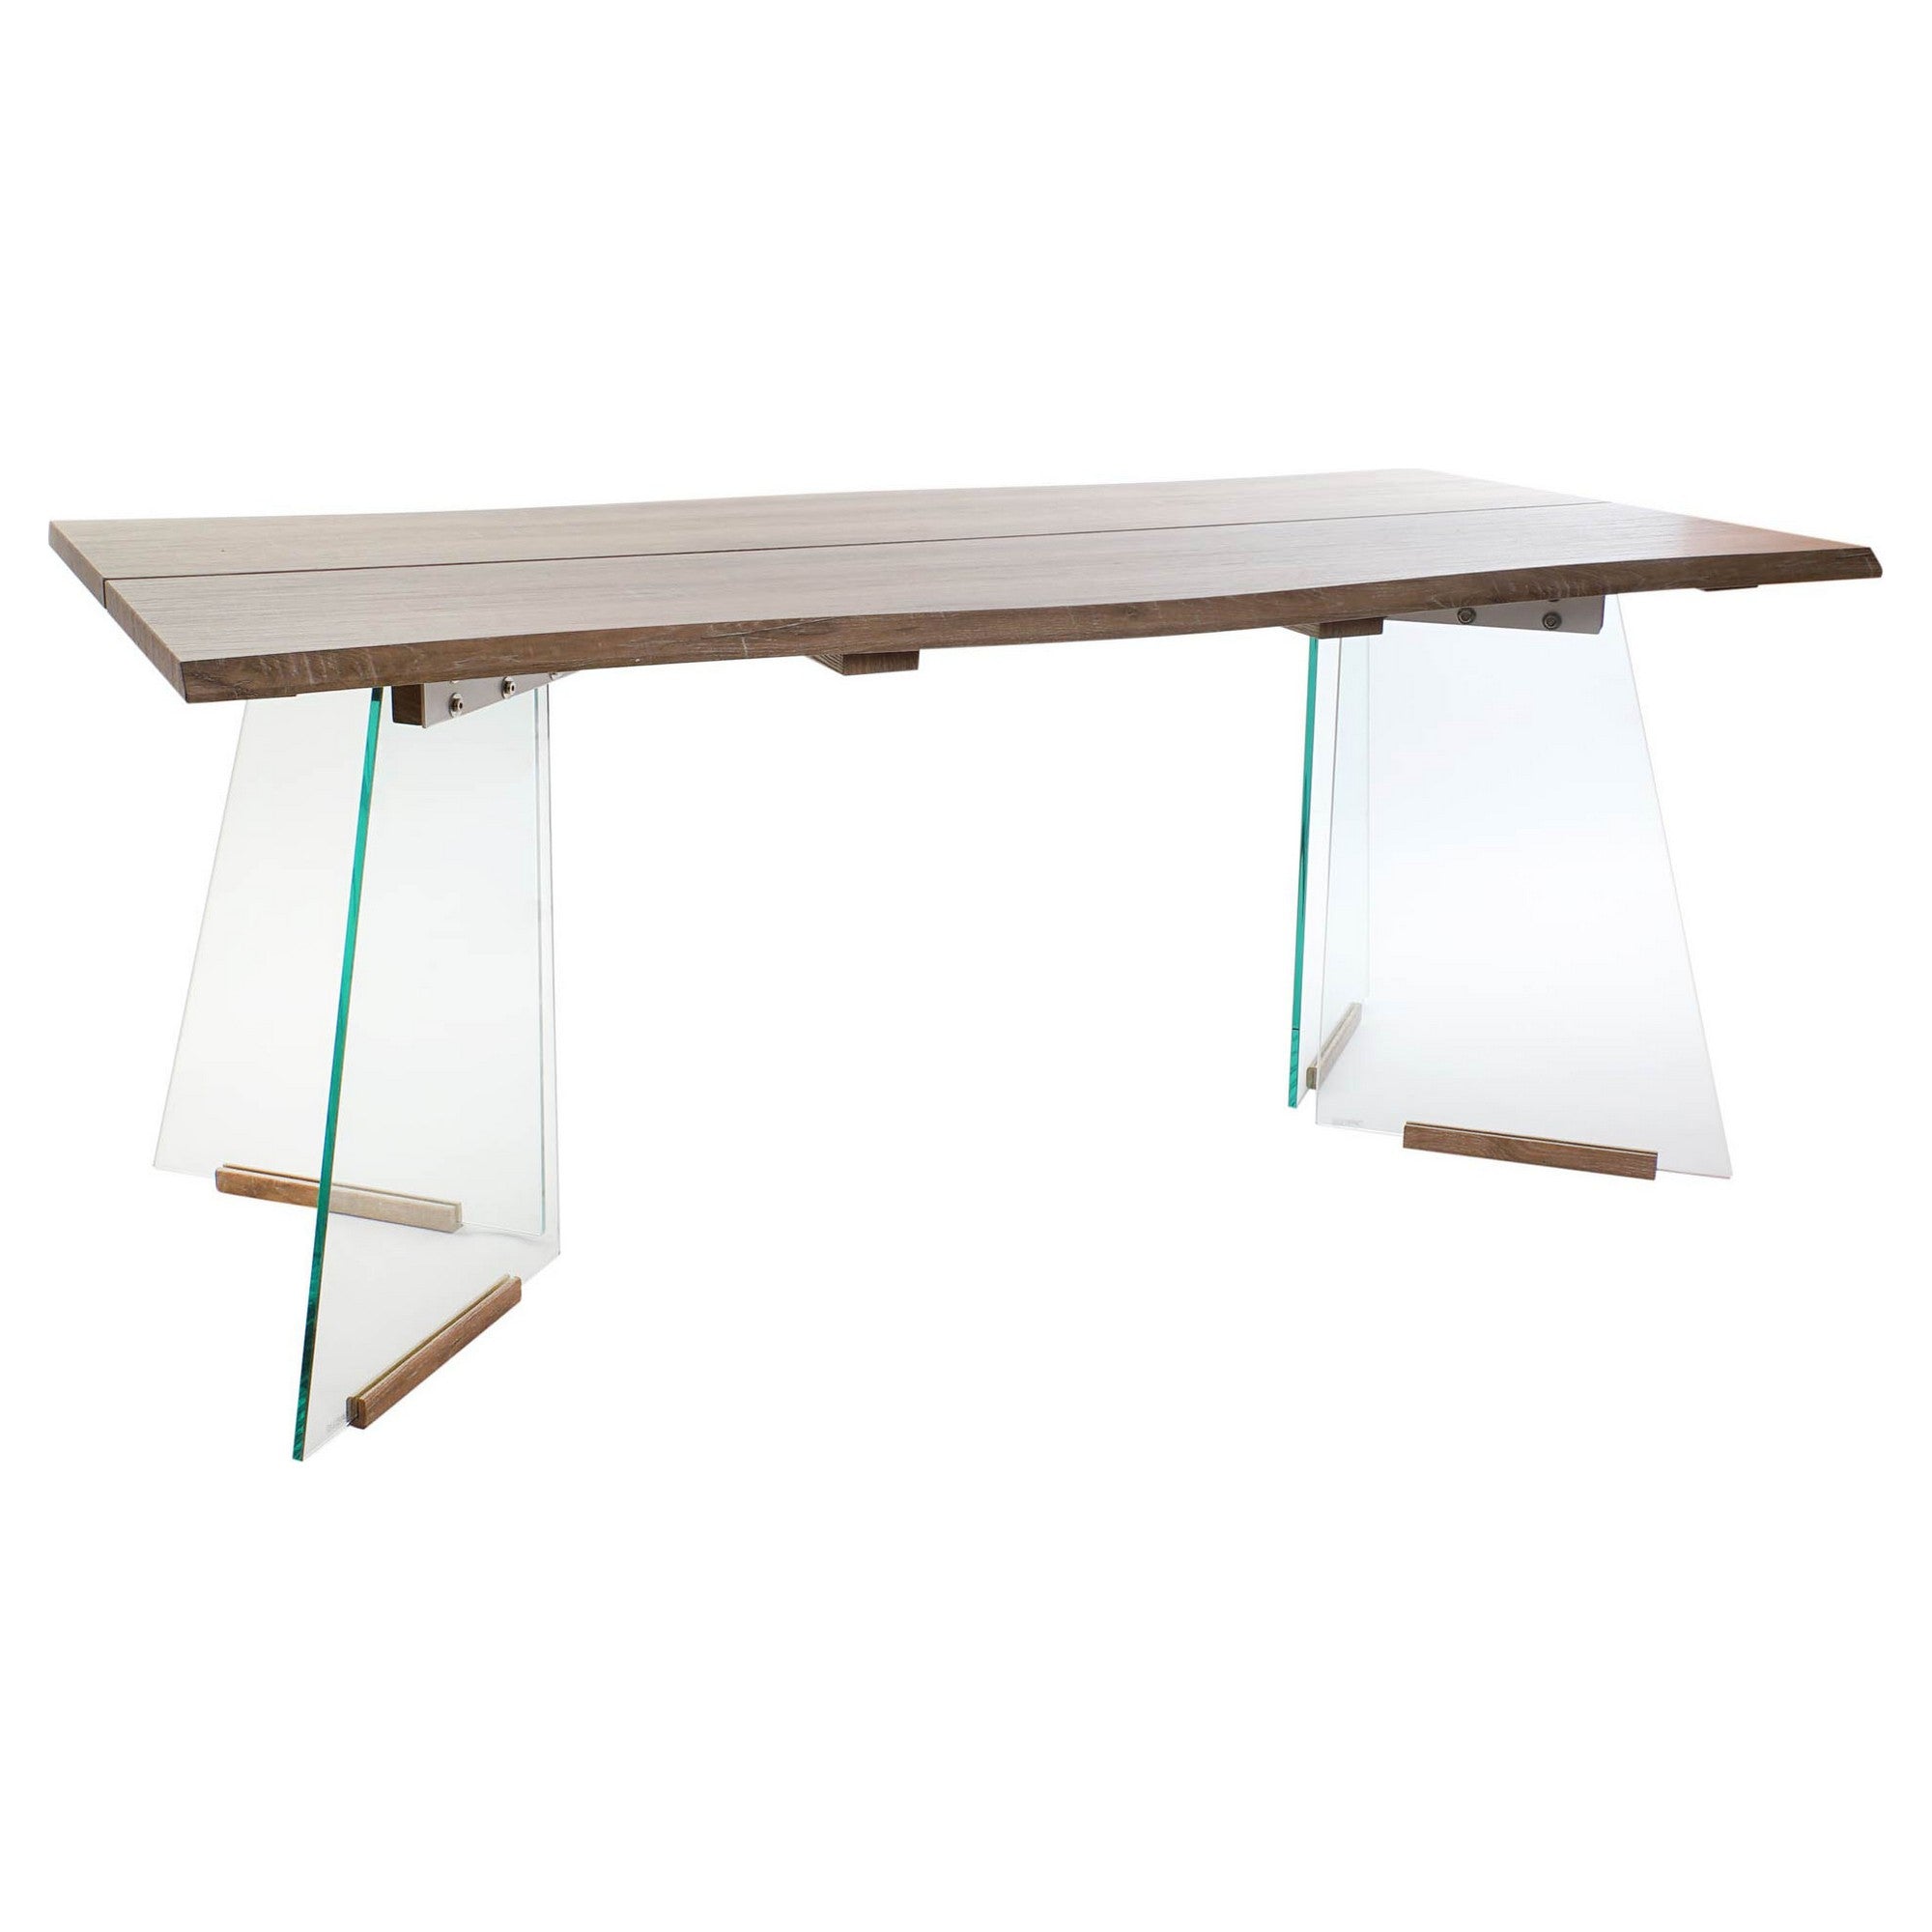 Dining Table in Wood and Glass Legs (180 x 90 x 76 cm)